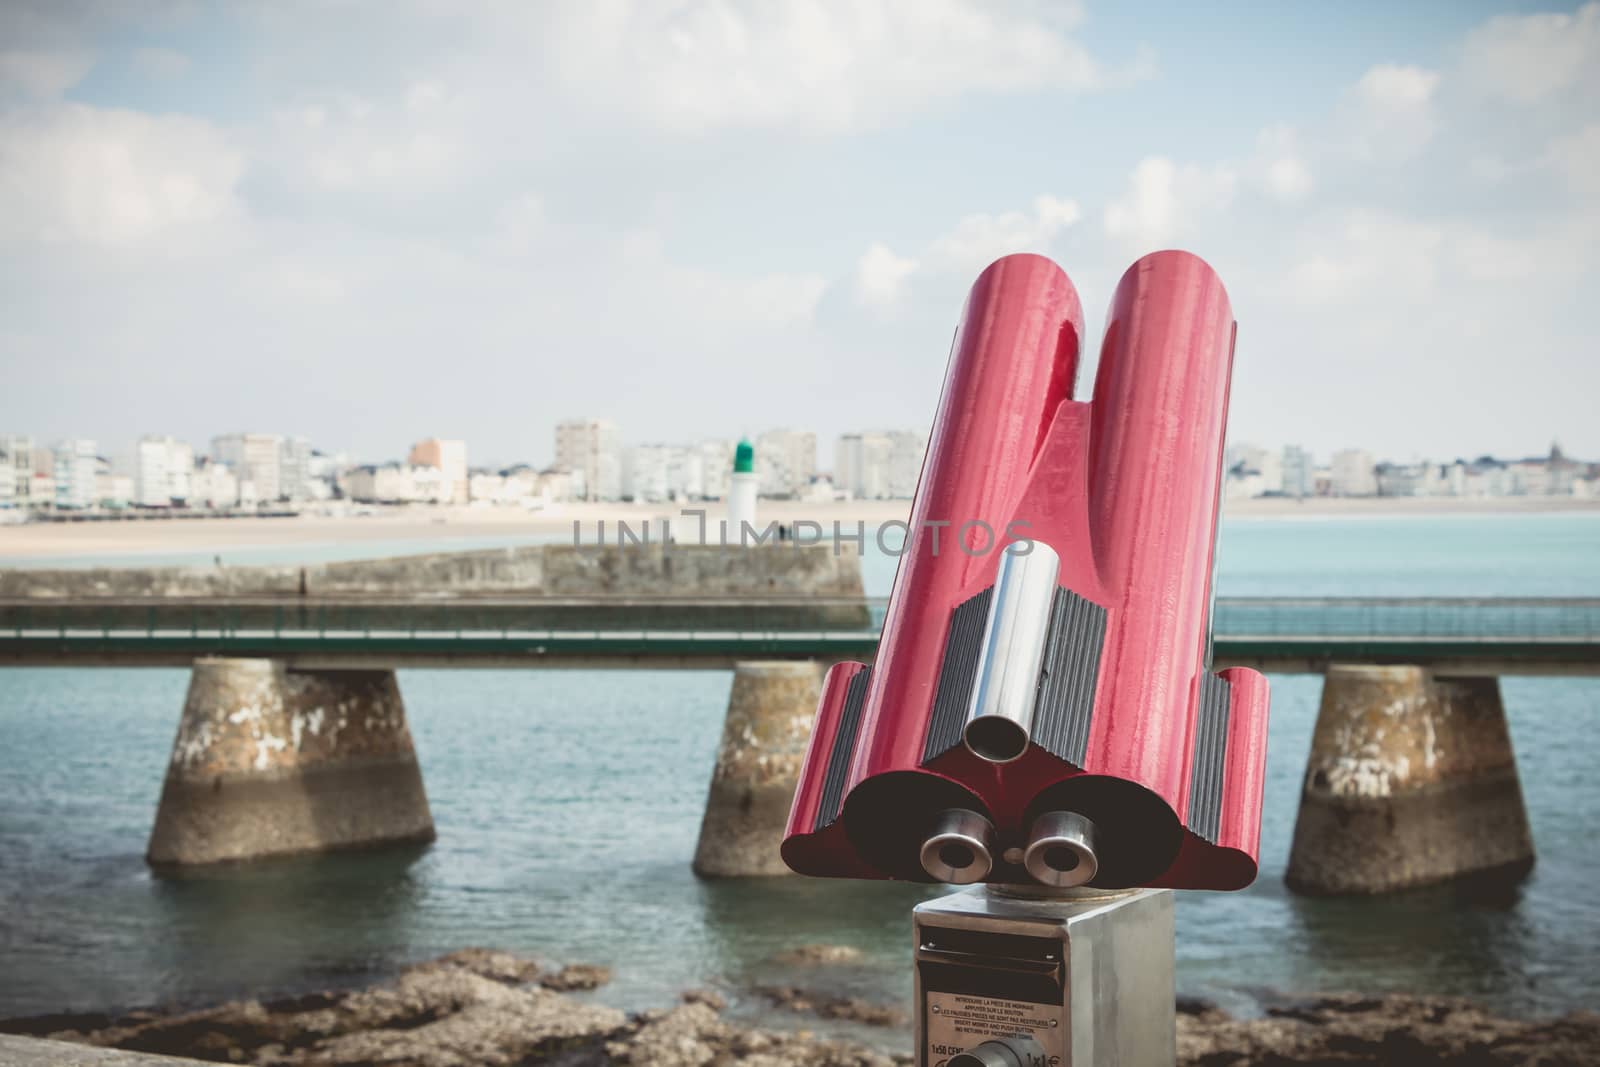 Sables d Olonne, France - October 13, 2015 : binocular telescope for tourist pointed to the beach on a fall day